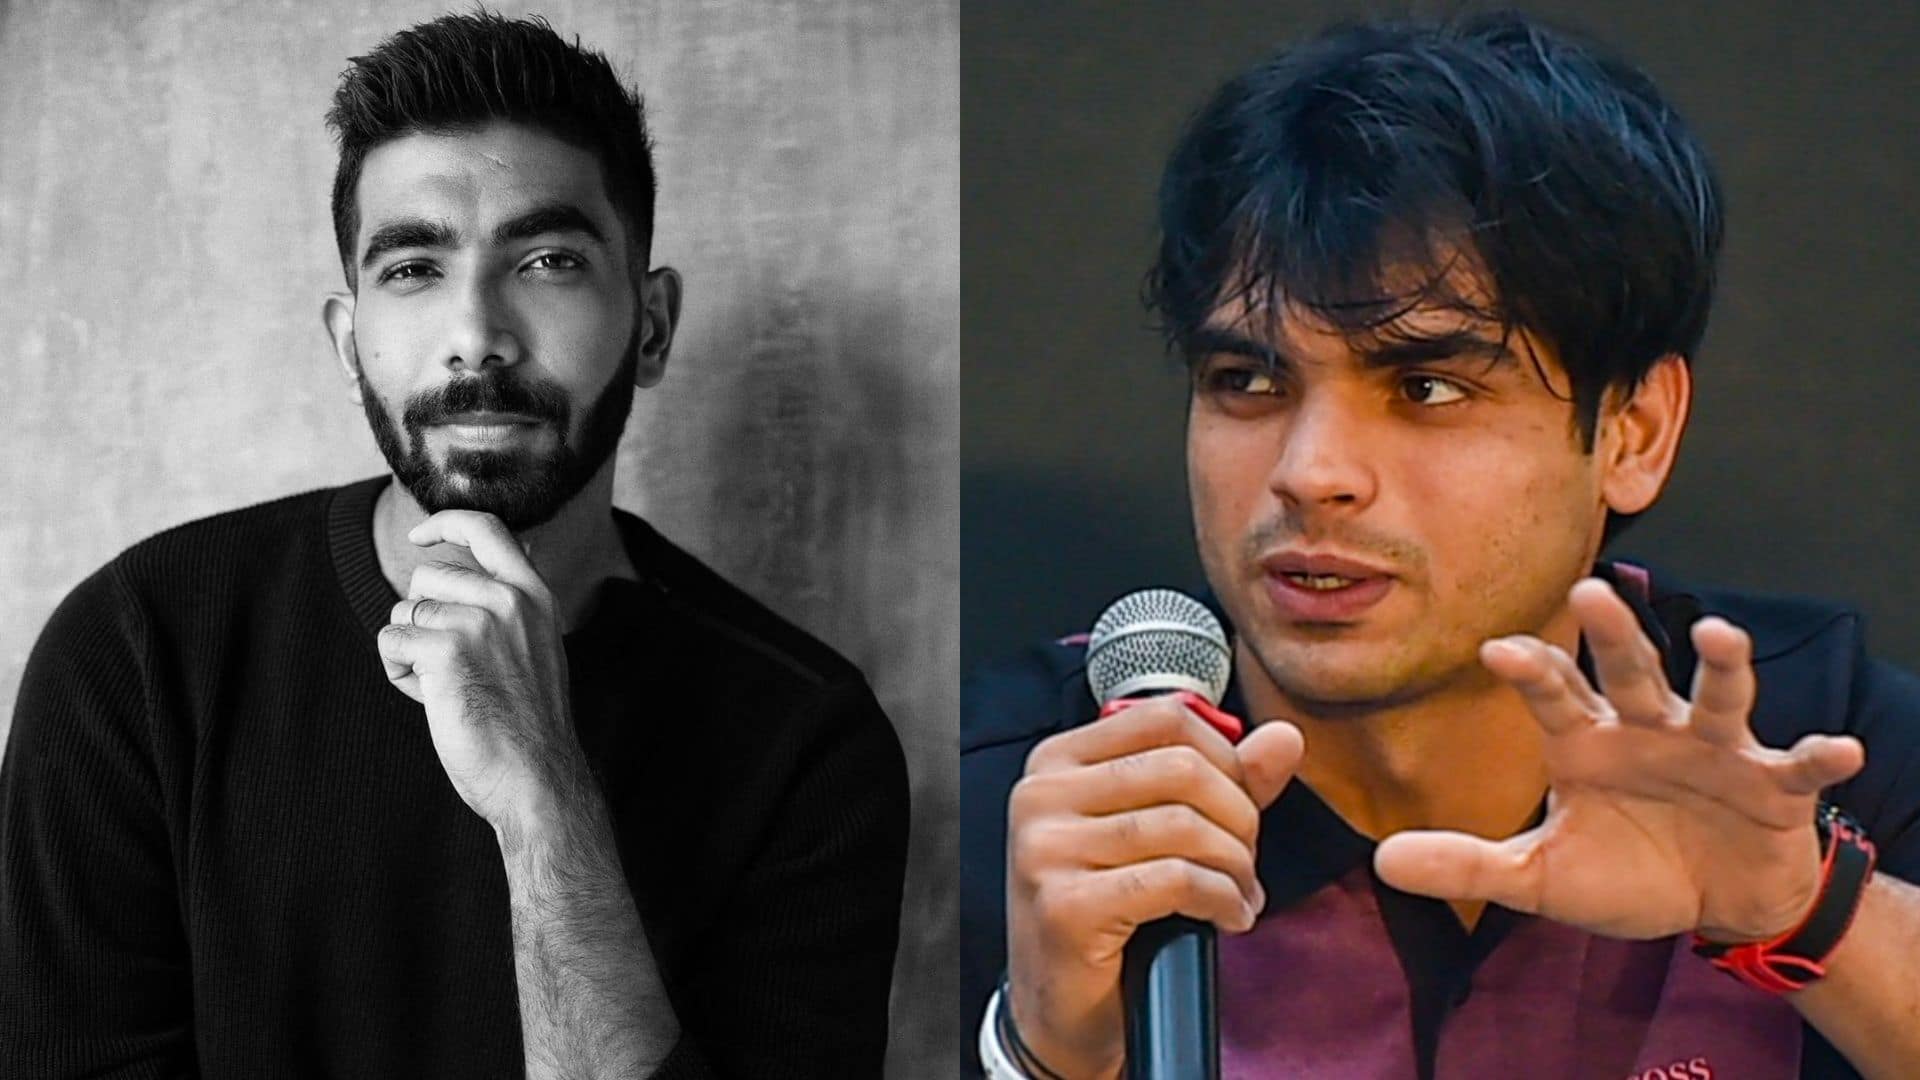 Olympic Gold Medalist Neeraj Chopra Shares Advice For Jasprit Bumrah To Increase Pace